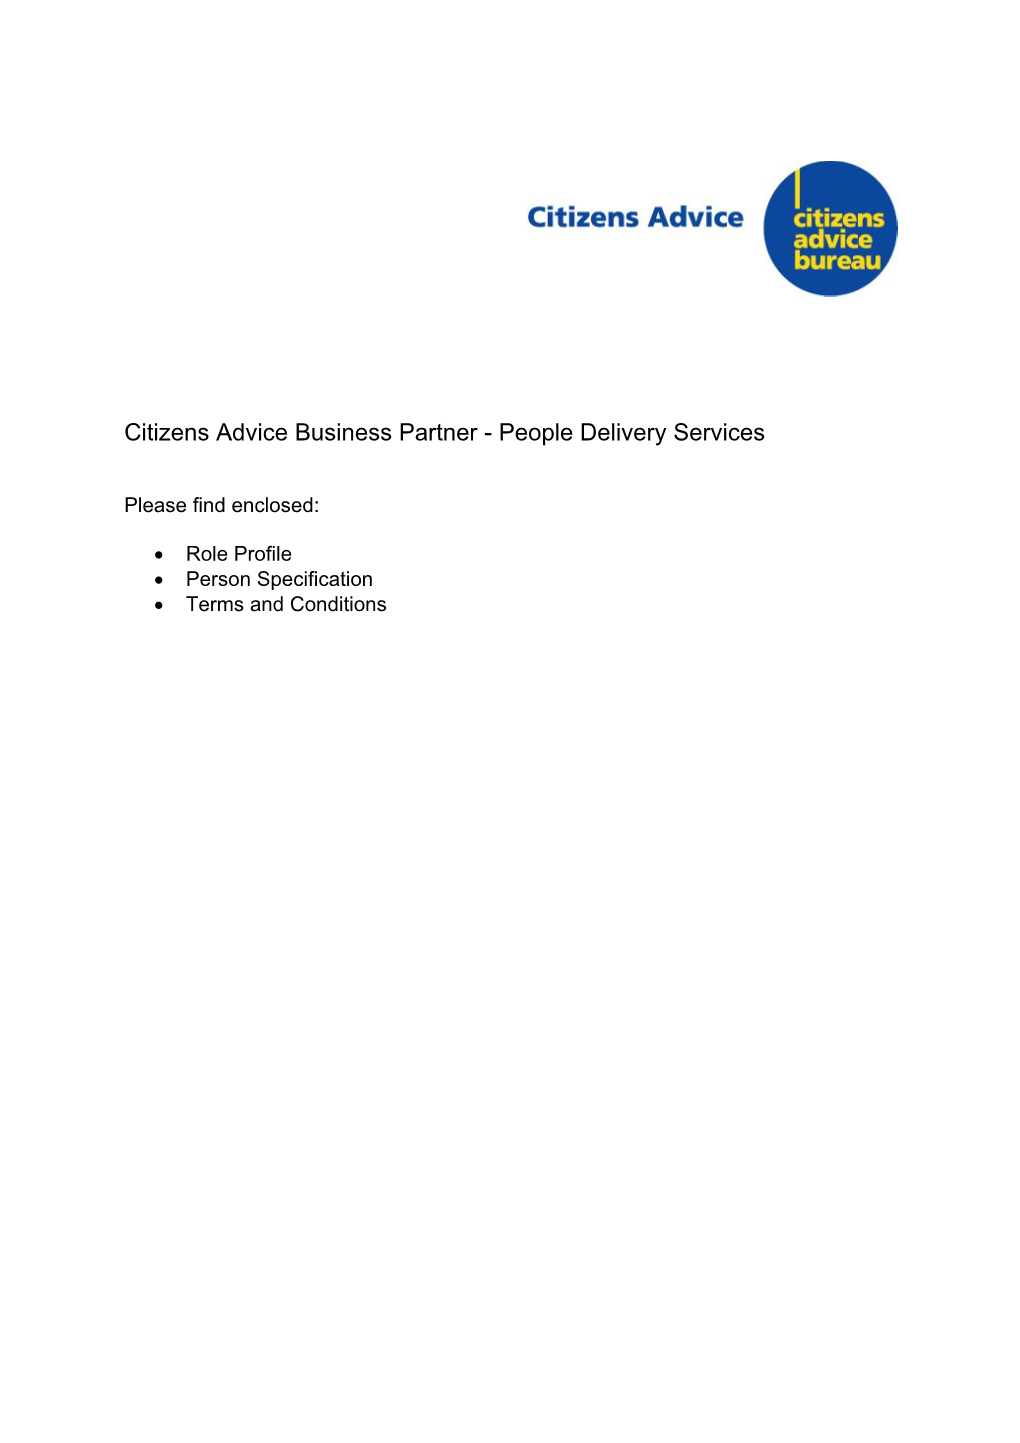 Citizens Advice Business Partner - People Delivery Services